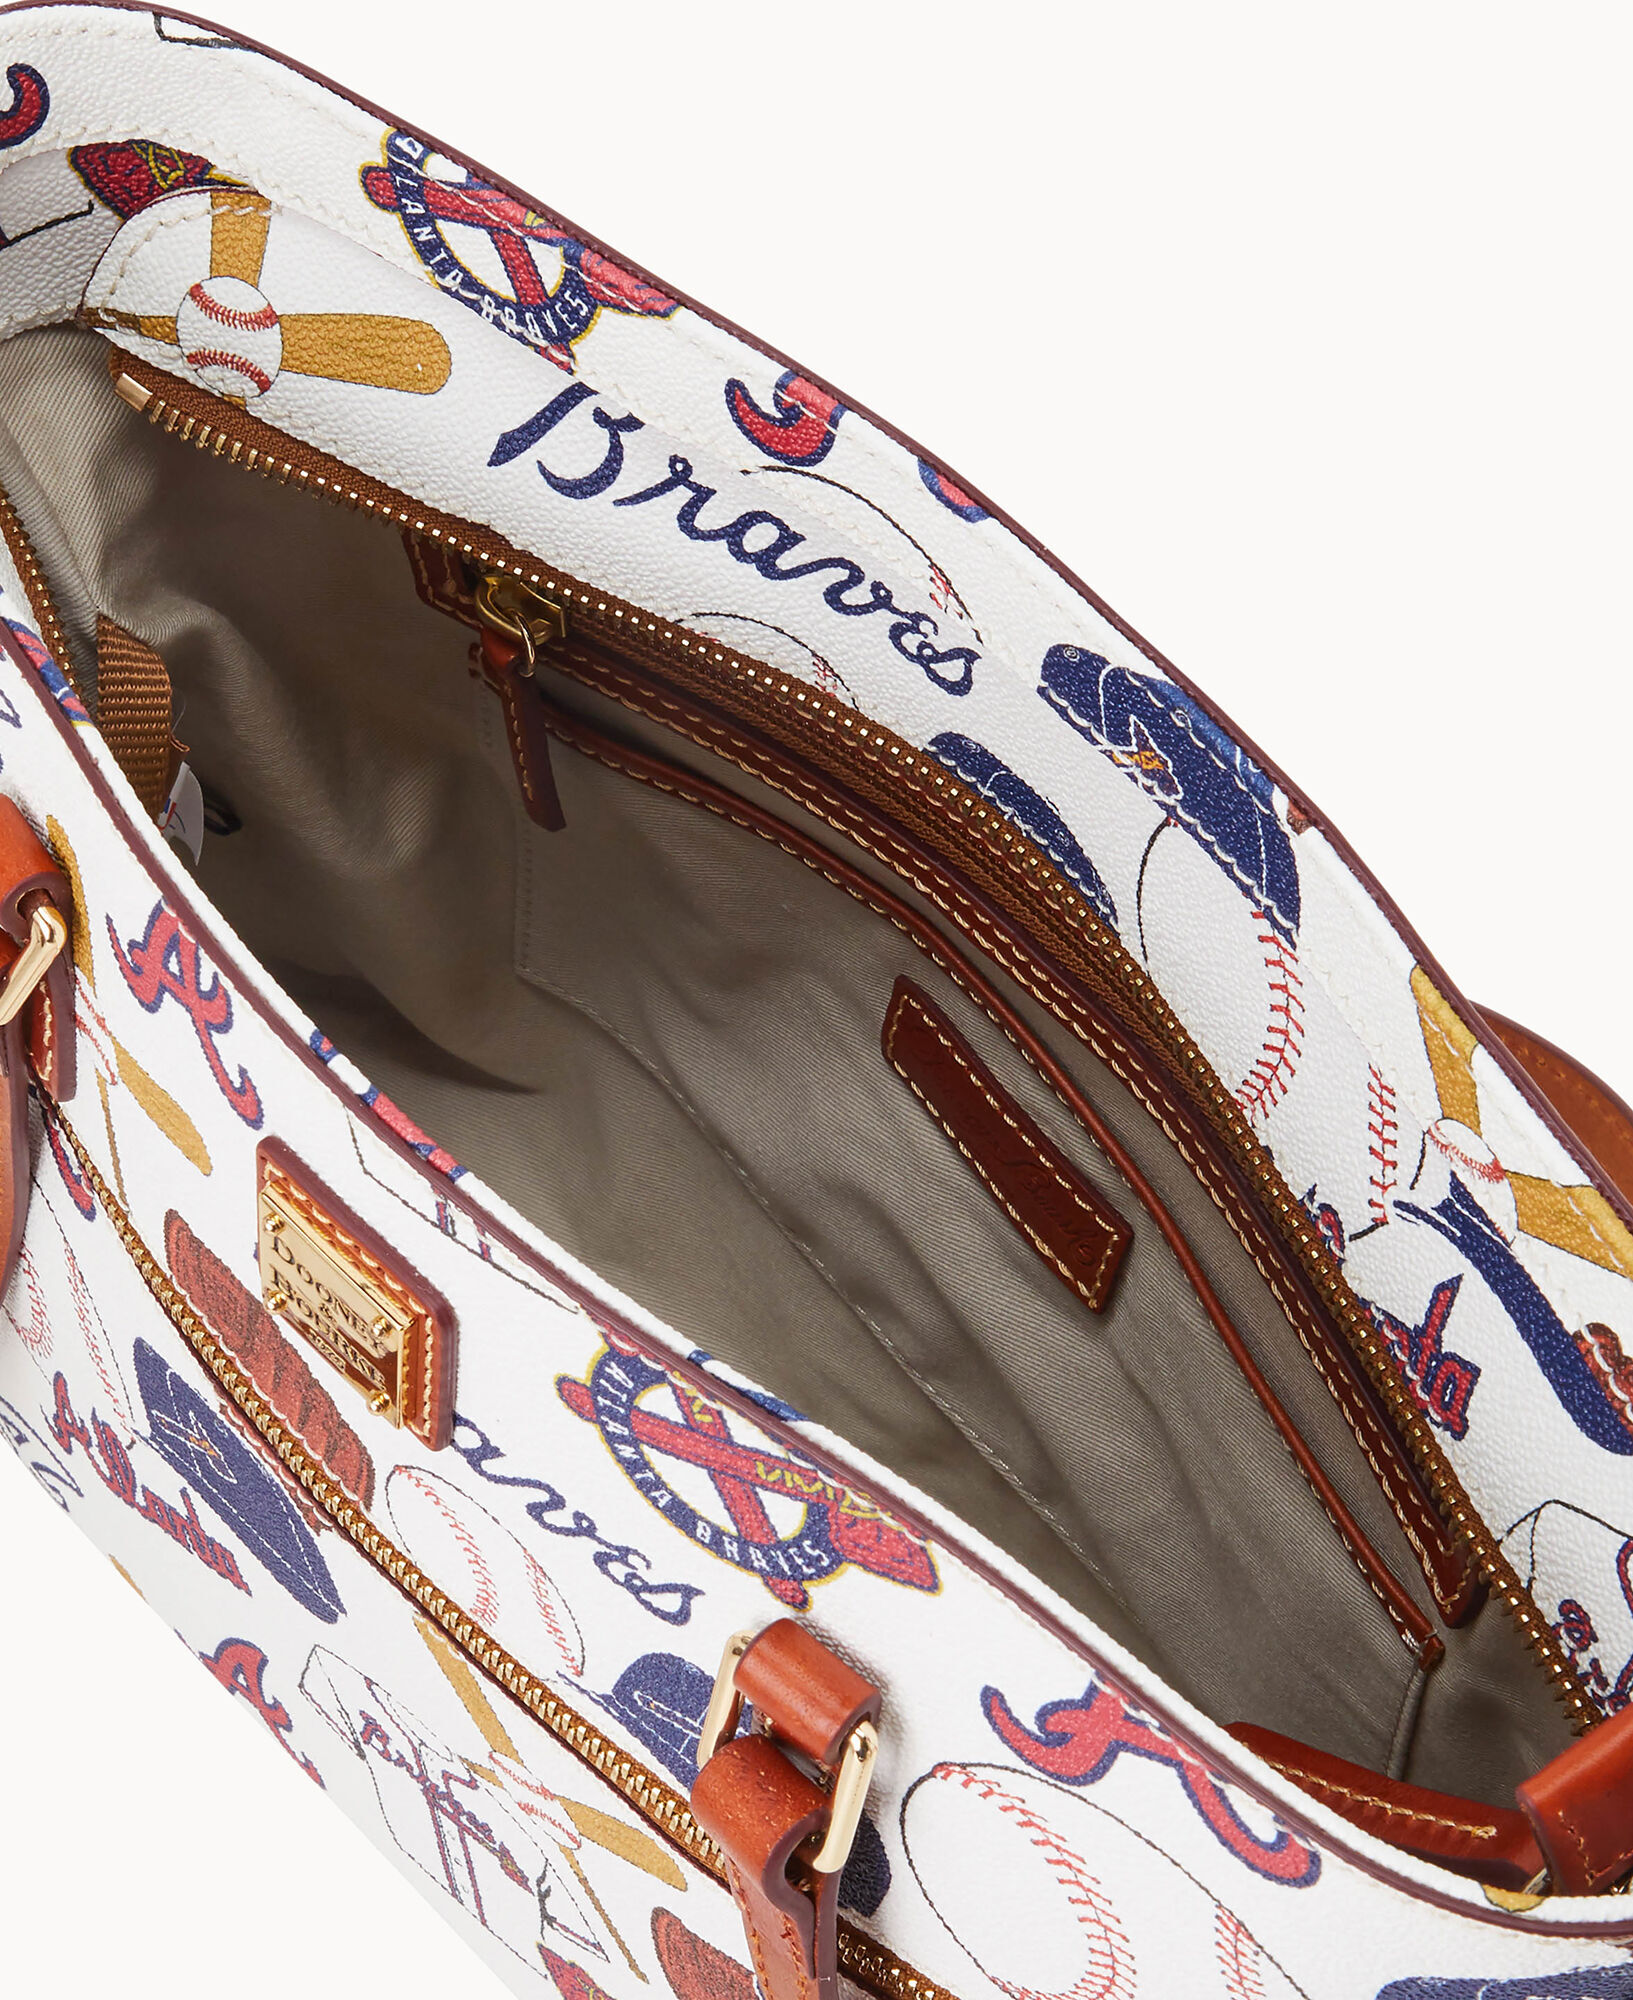 Cheap Dooney & Bourke MLB Gear, Discounted Dooney & Bourke MLB Store,  Clearance Dooney & Bourke Originals and More